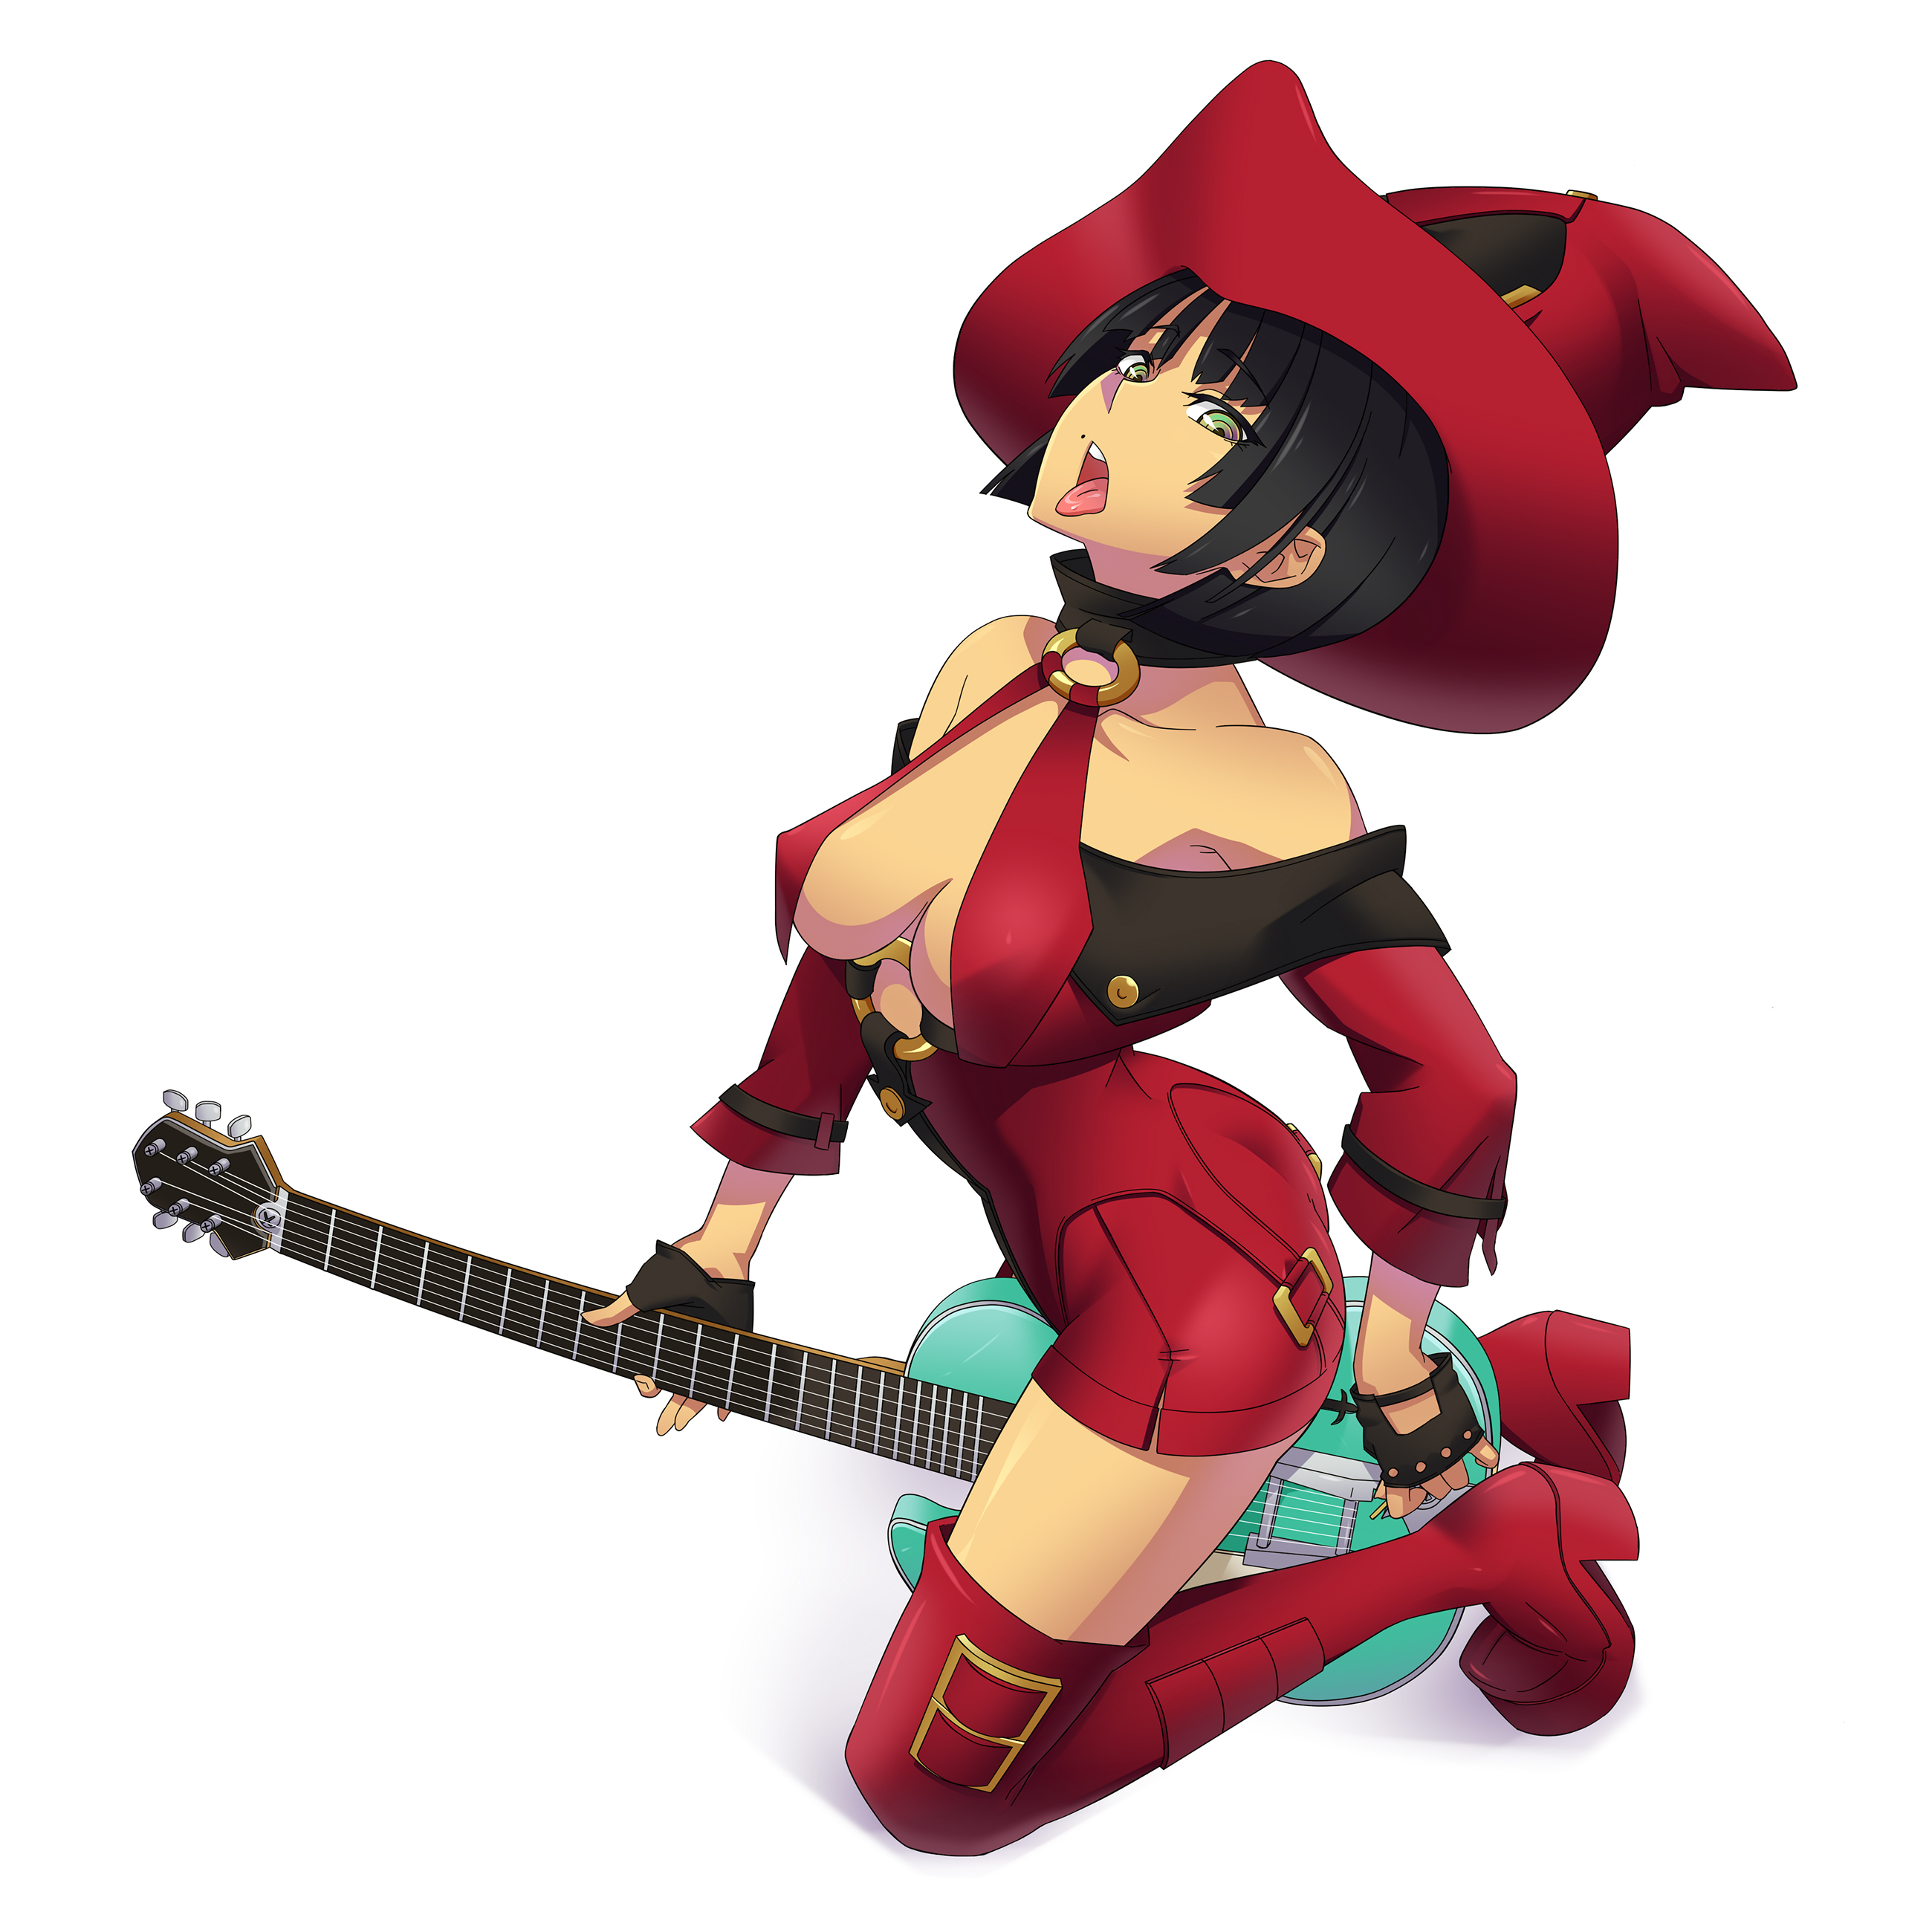 Anime 2600x2600 I-No Guilty Gear cleavage tongue out guitar white background